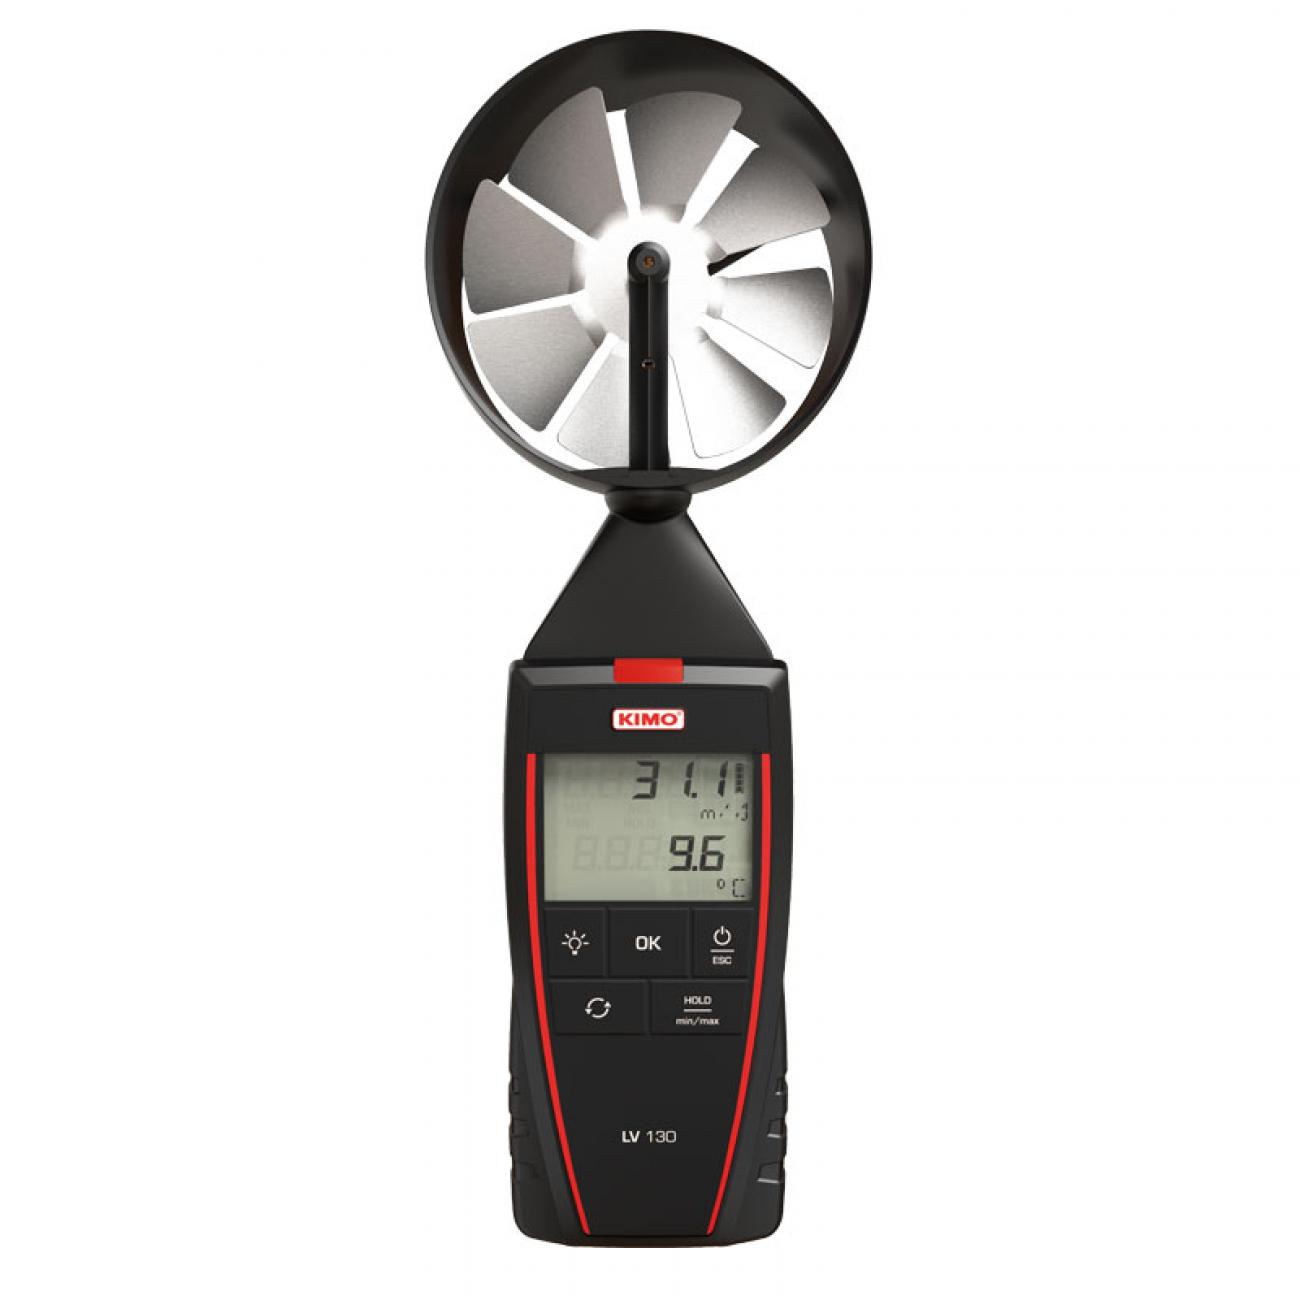 LV 130 Thermo-anemometer with integrated vane probe